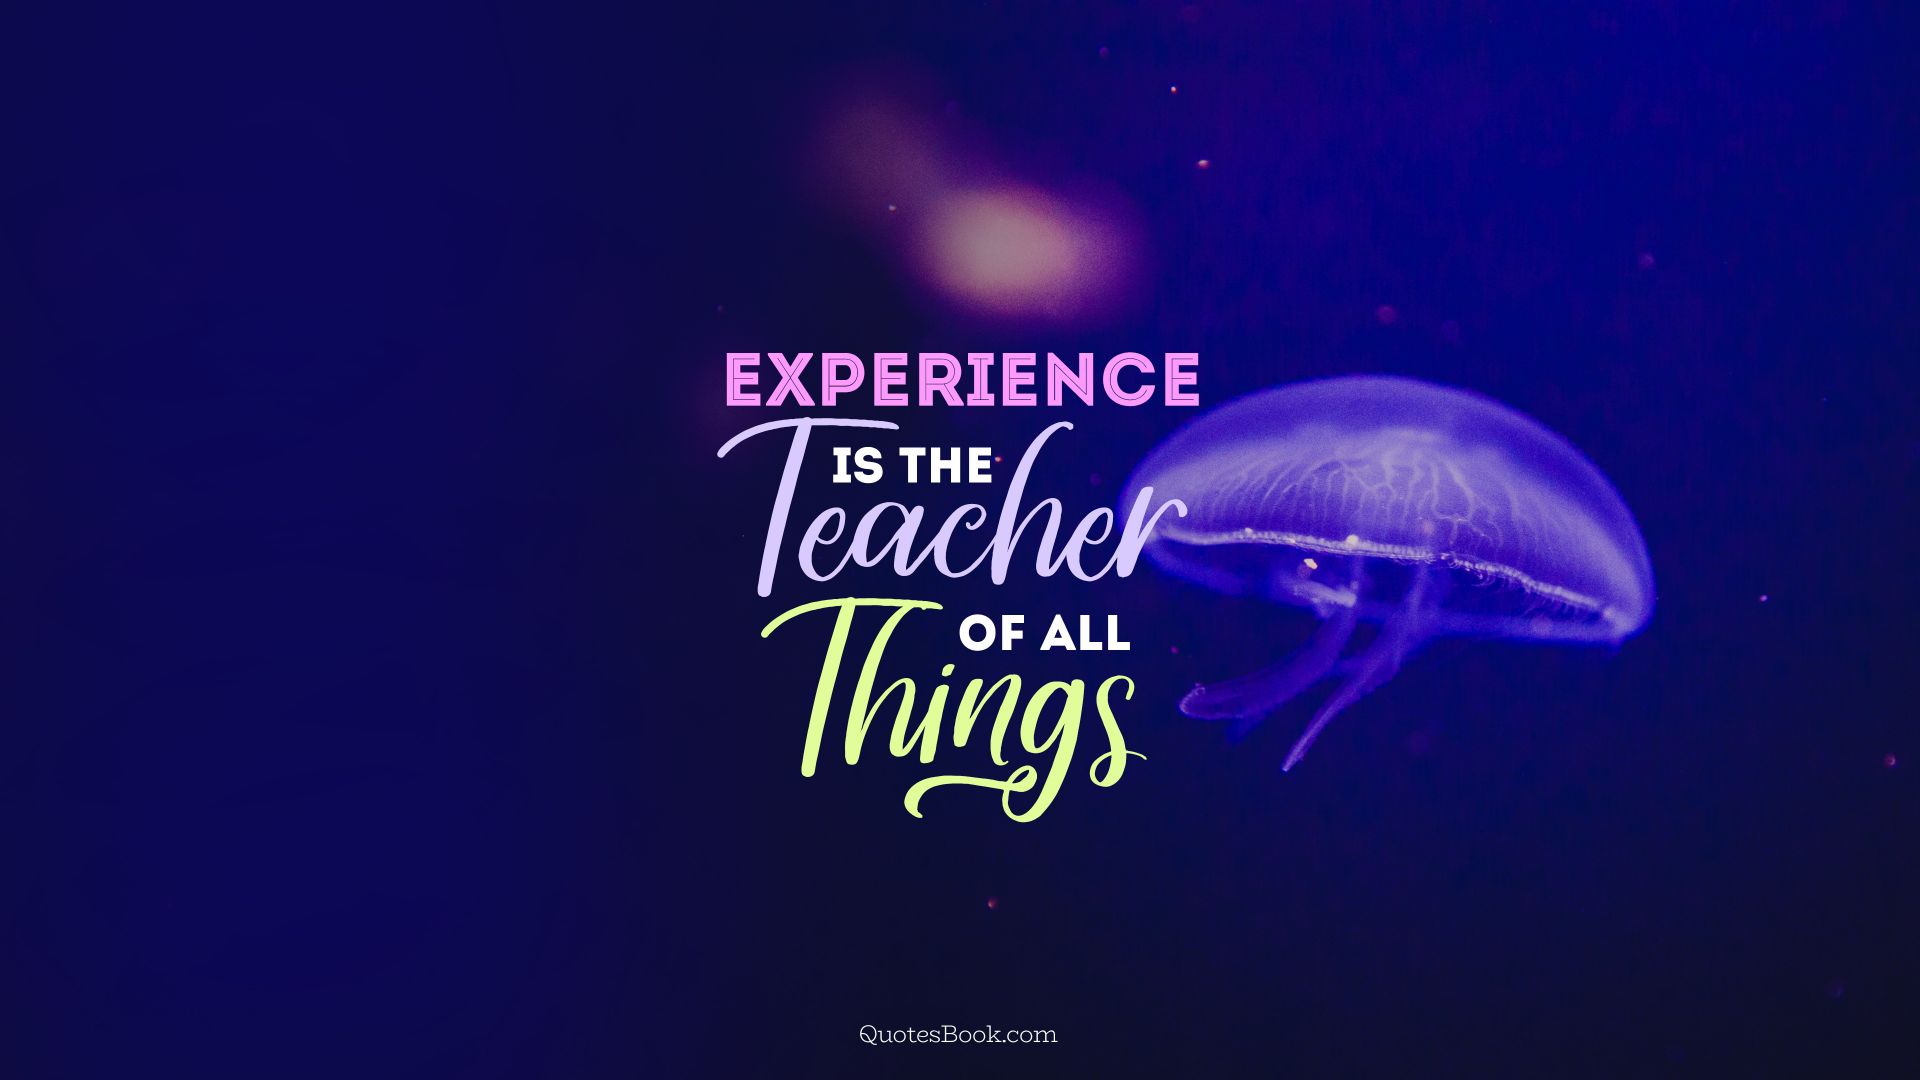 Experience is the teacher of all things